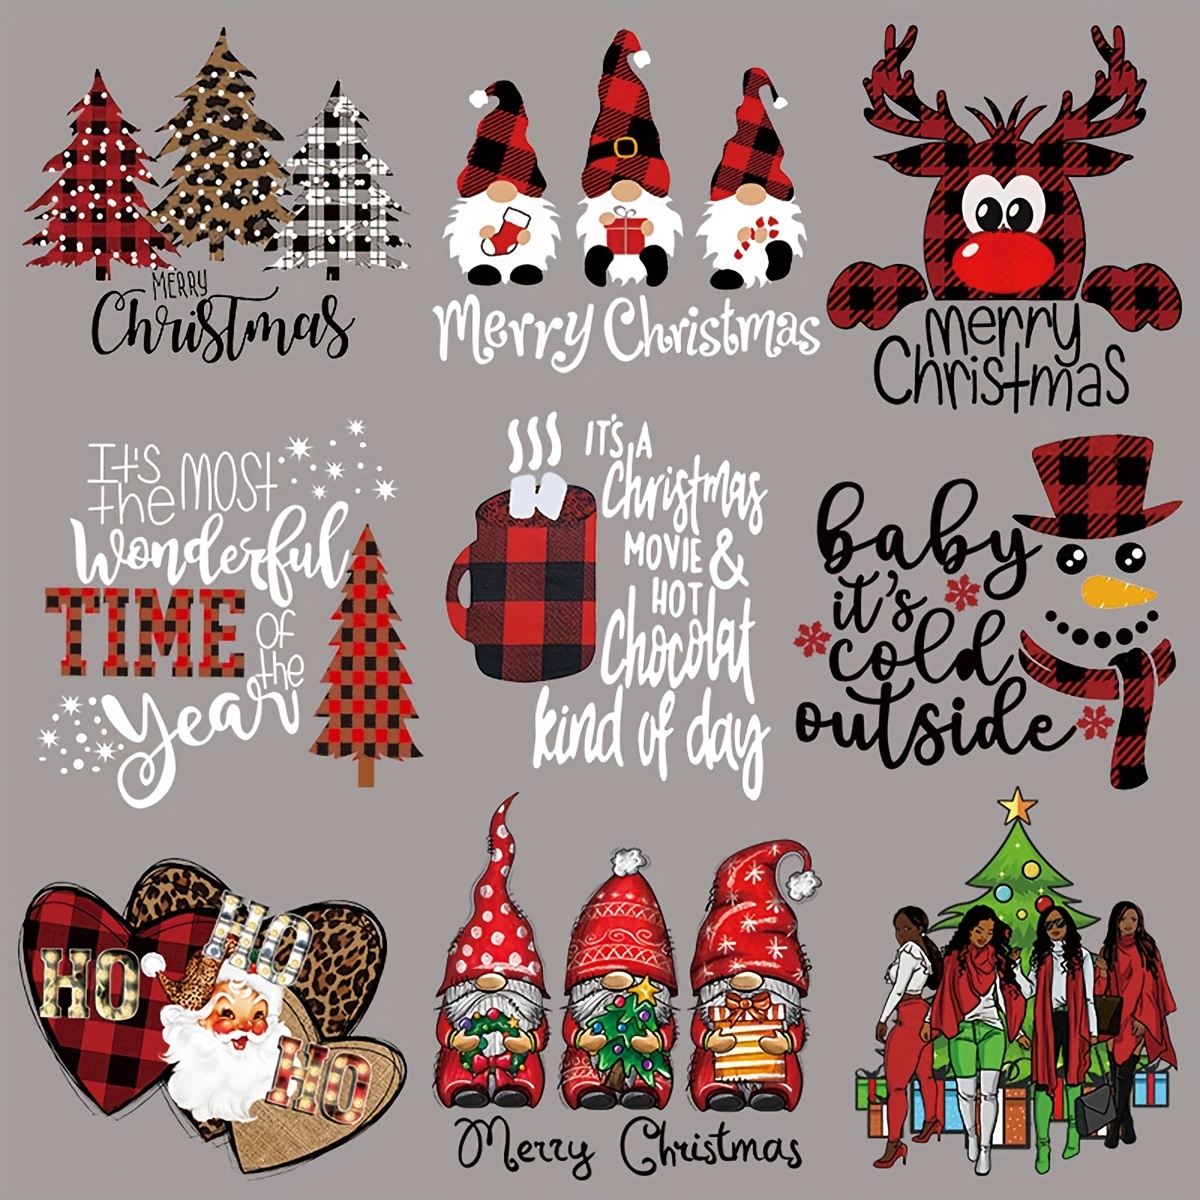  12 Sheets Christmas Iron on Transfers for T Shirts